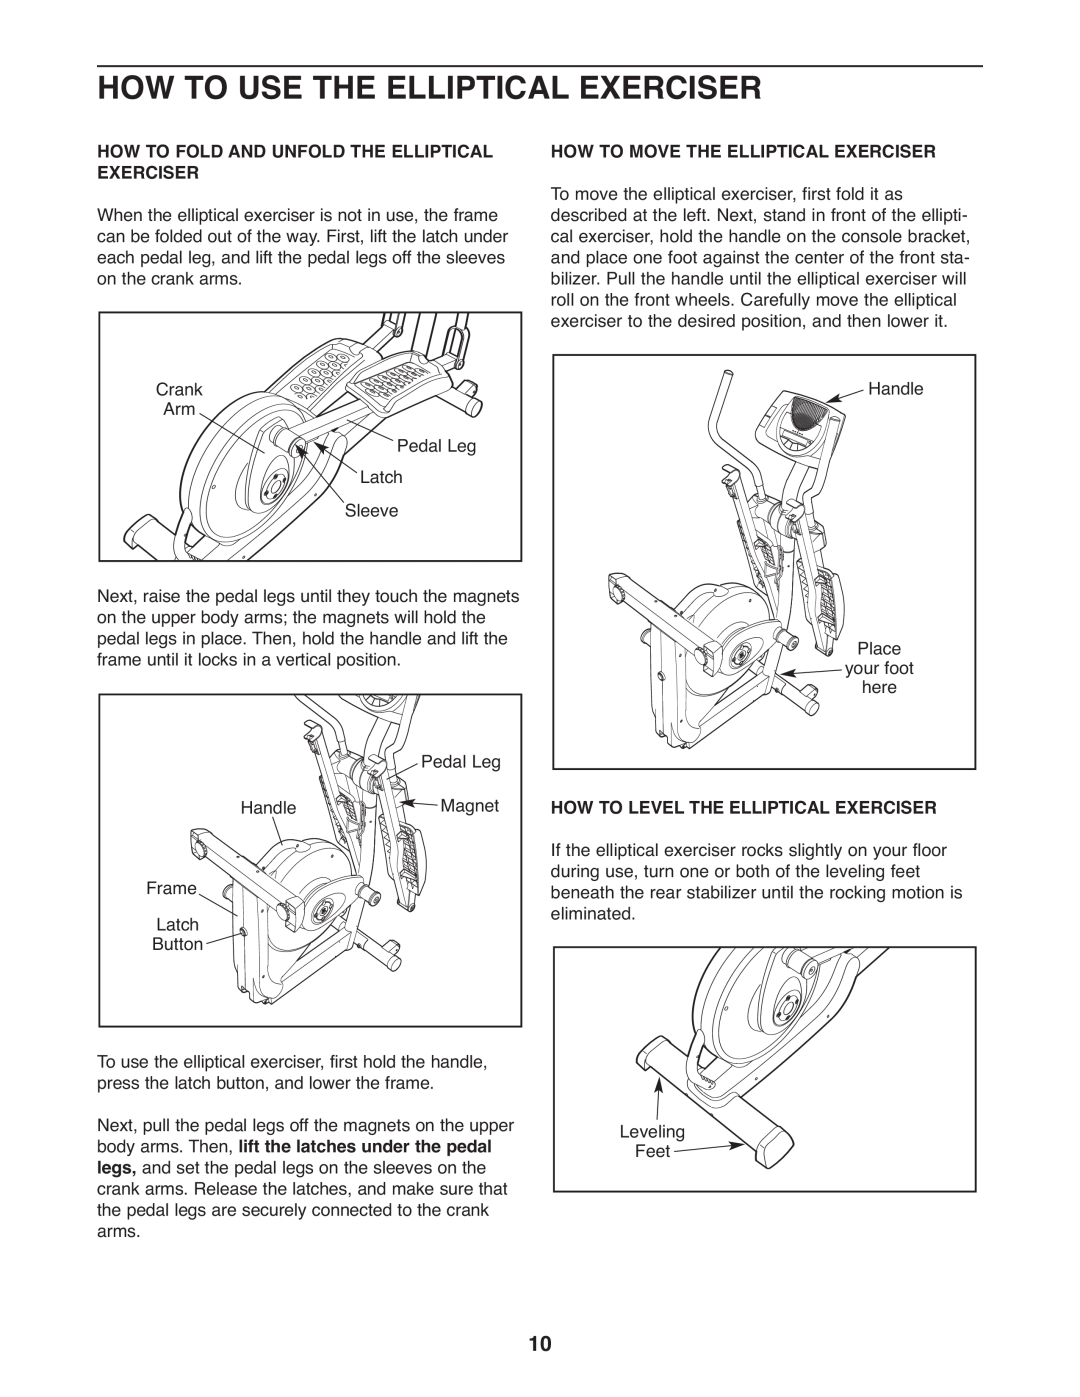 NordicTrack 30510.1 user manual How To Use The Elliptical Exerciser, How To Fold And Unfold The Elliptical Exerciser 